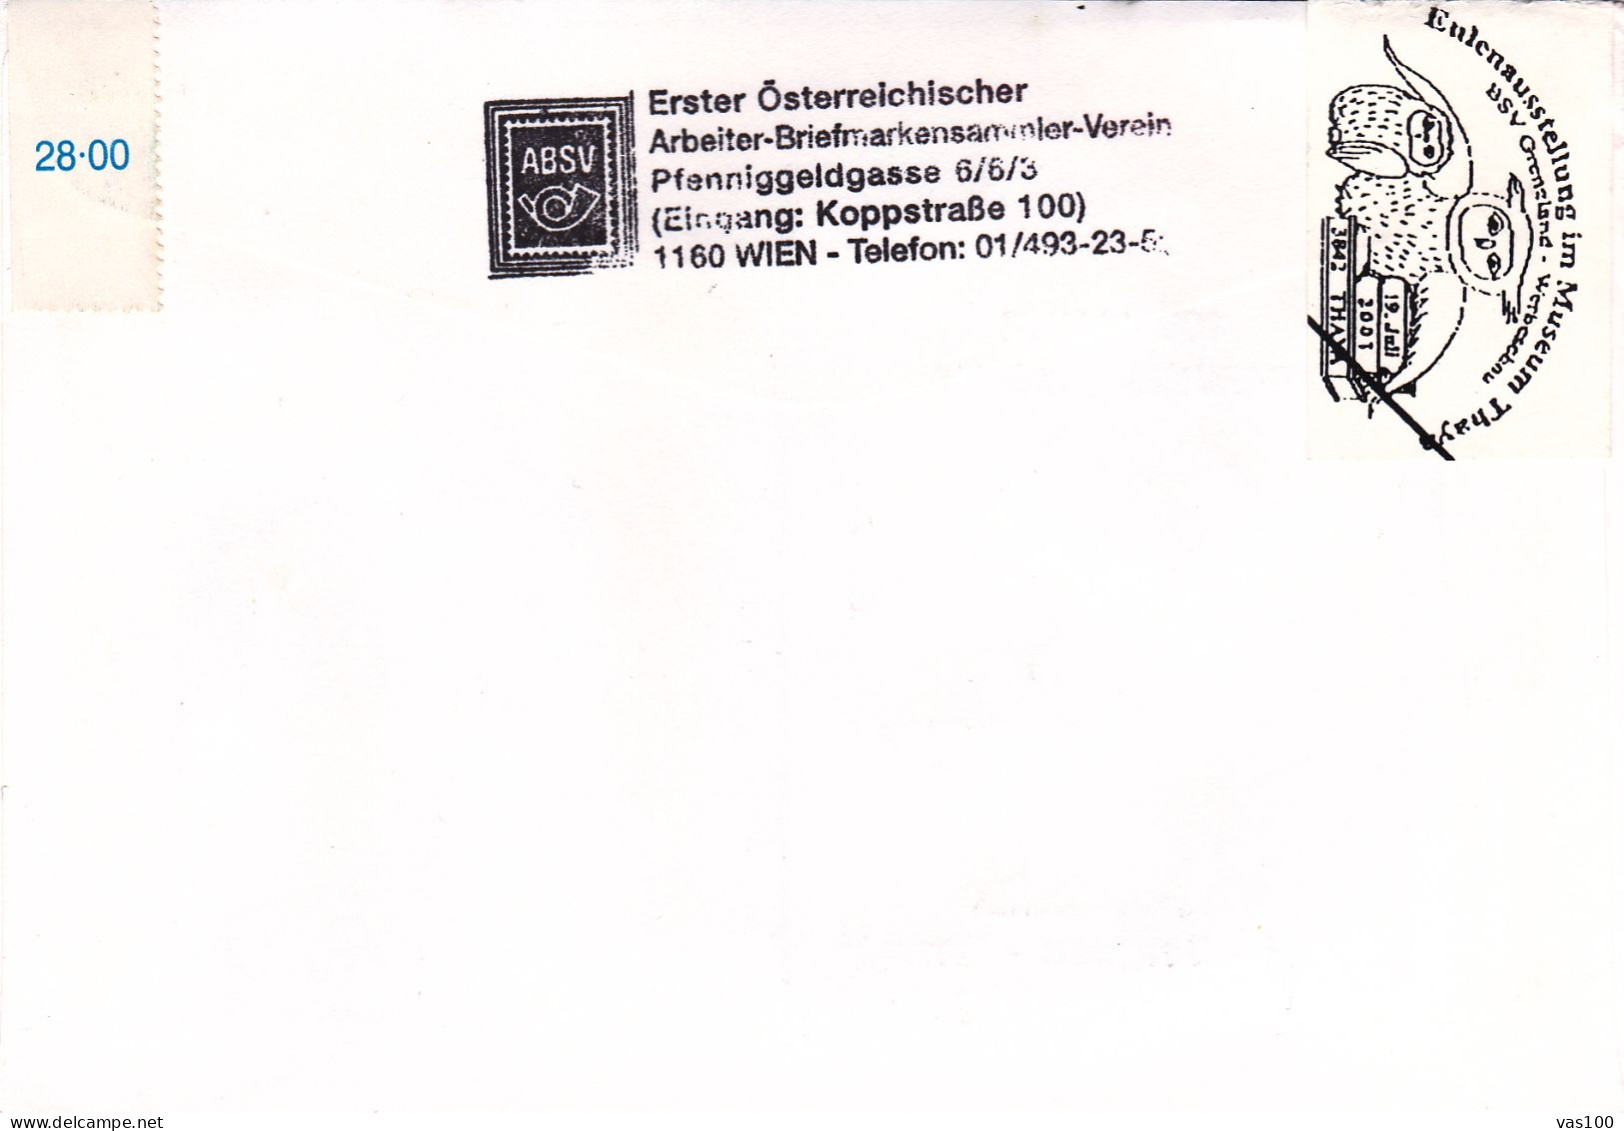 Austria / Oesterreich  2001 OWLS BIRDS COVERS FDC - Hiboux & Chouettes